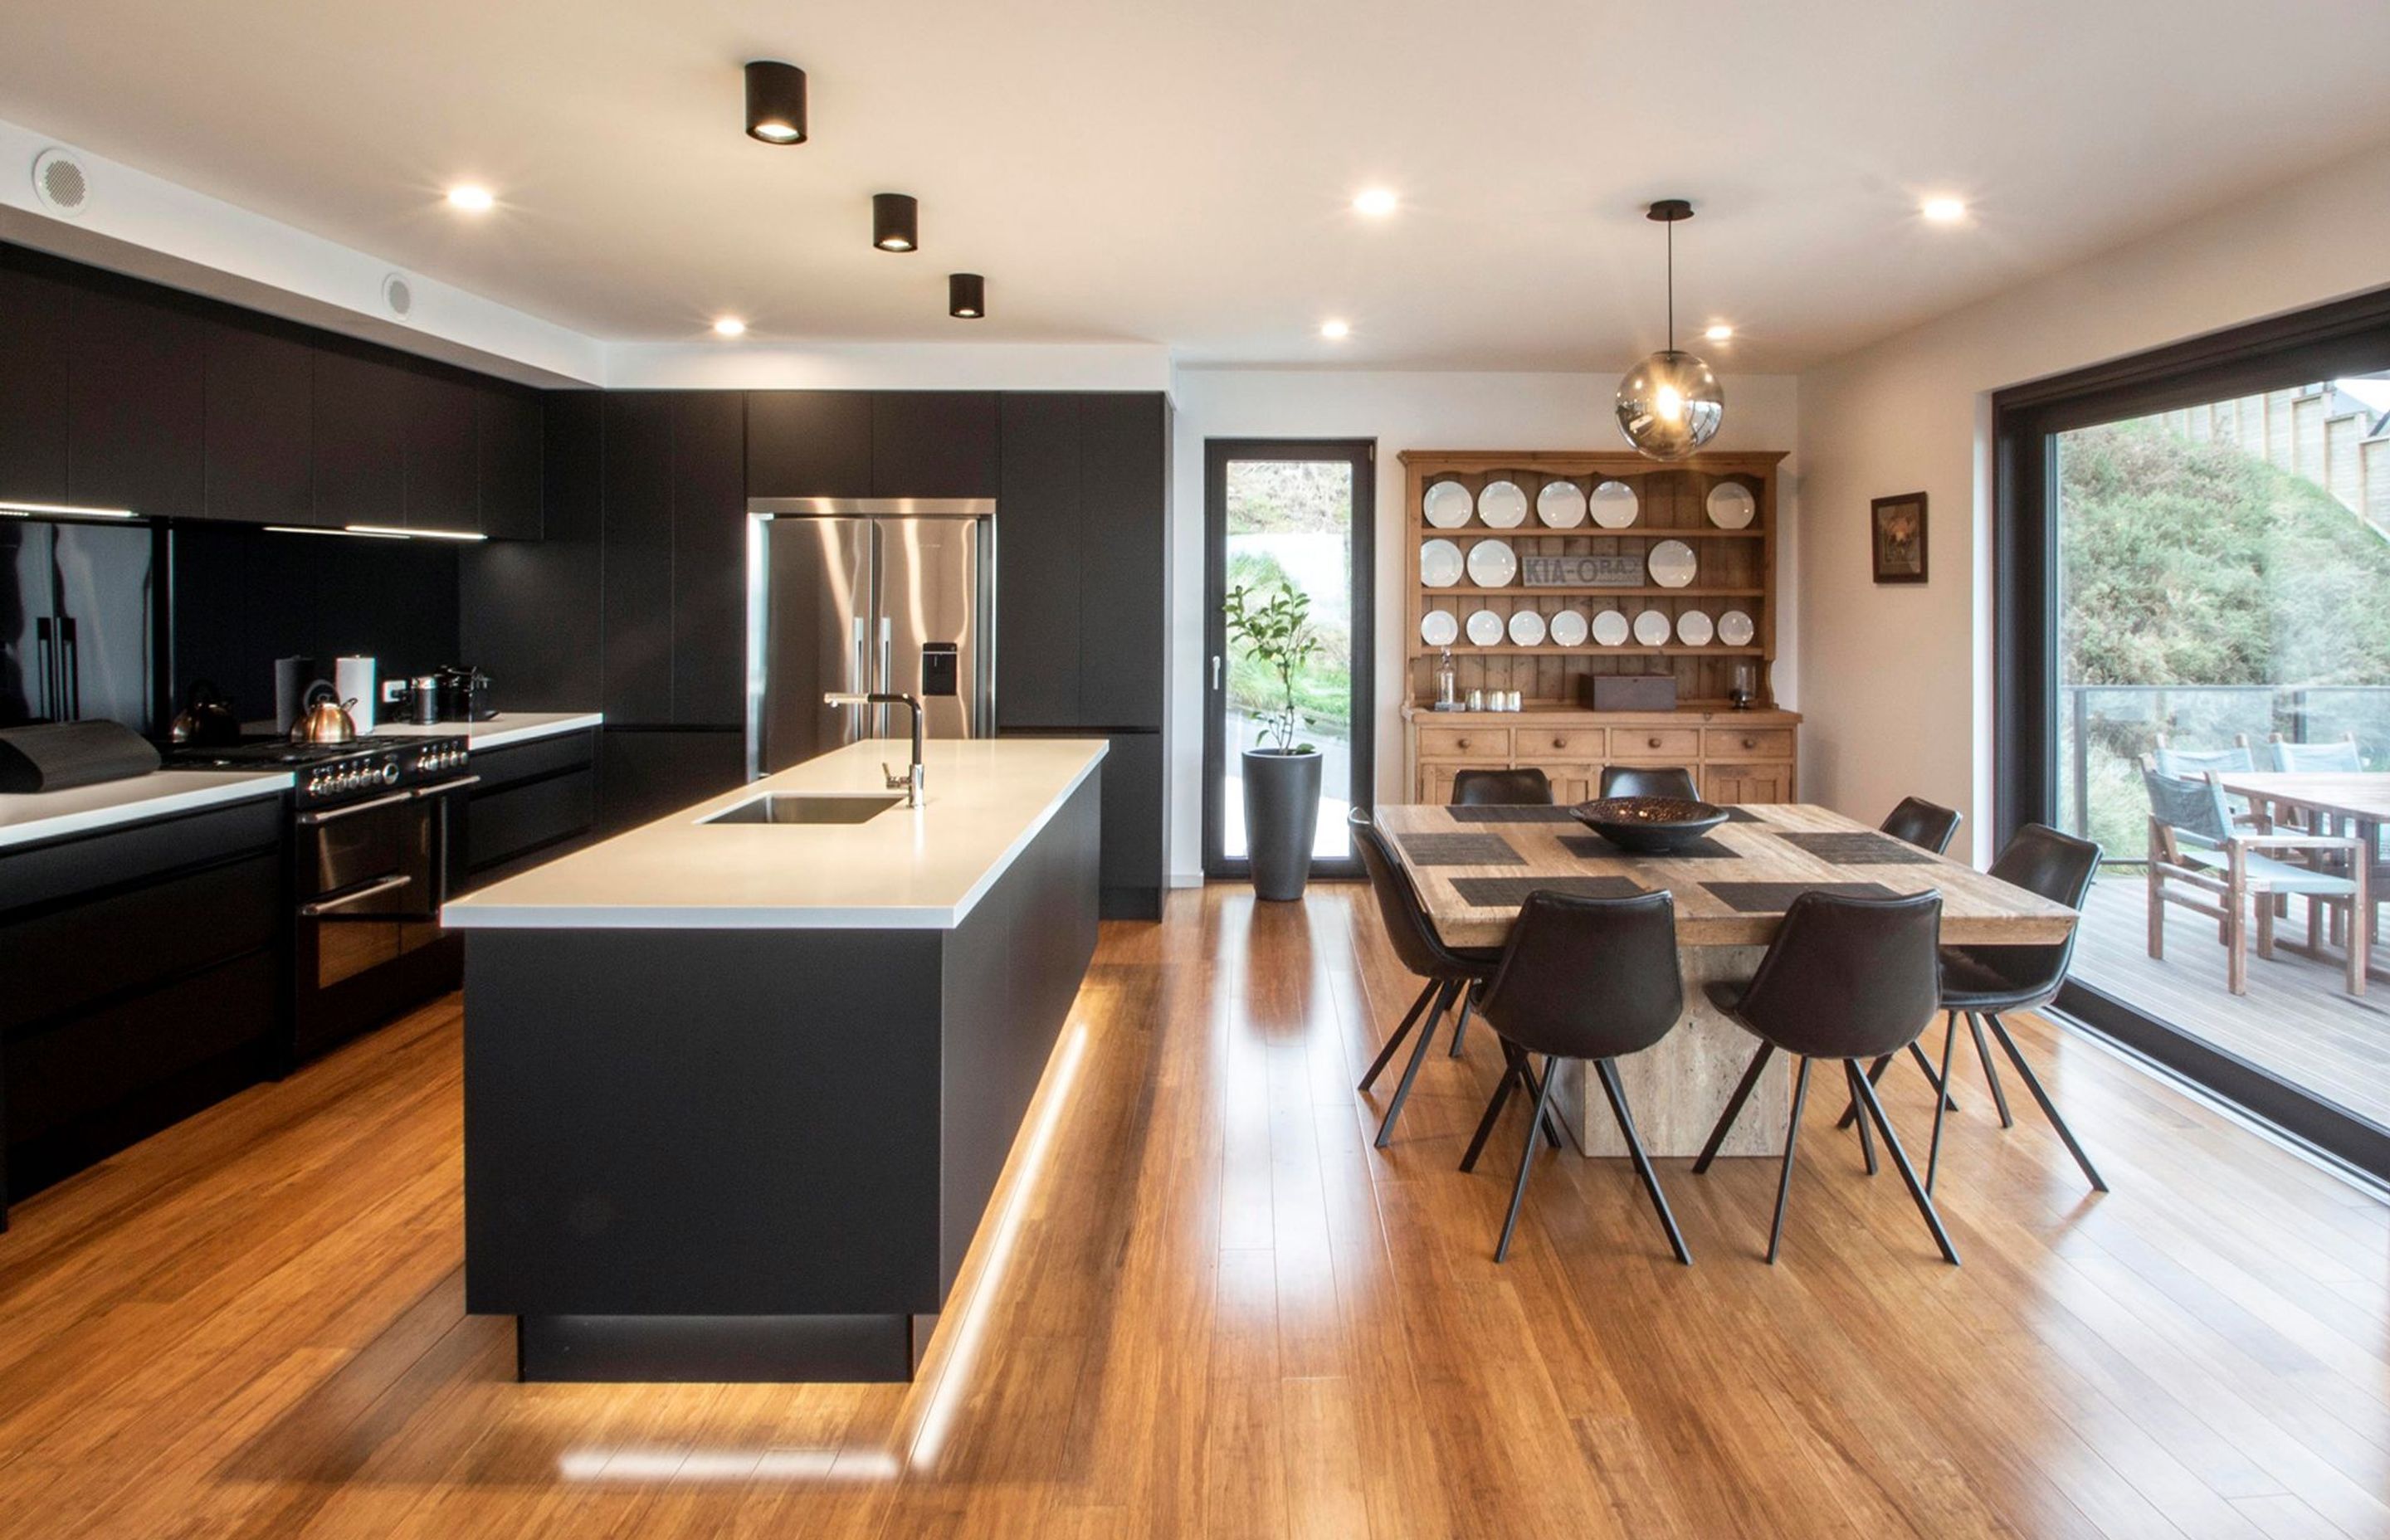 The black and white kitchen and living area is brought to life with warm bamboo flooring.